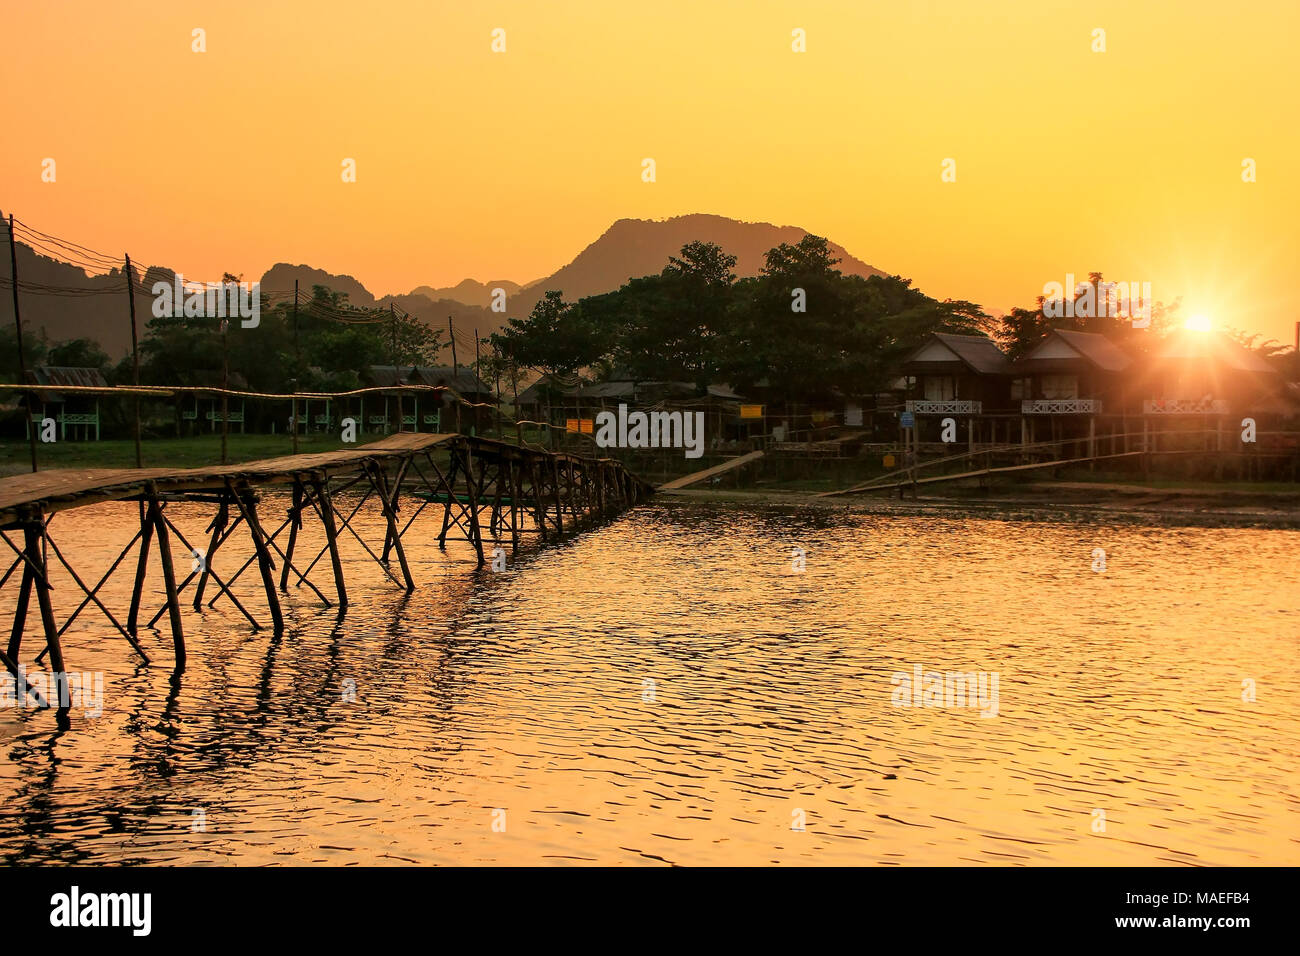 Nam Song River with wooden bridge at sunset in Vang Vieng, Laos. Vang Vieng is a popular destination for adventure tourism in a limestone karst landsc Stock Photo